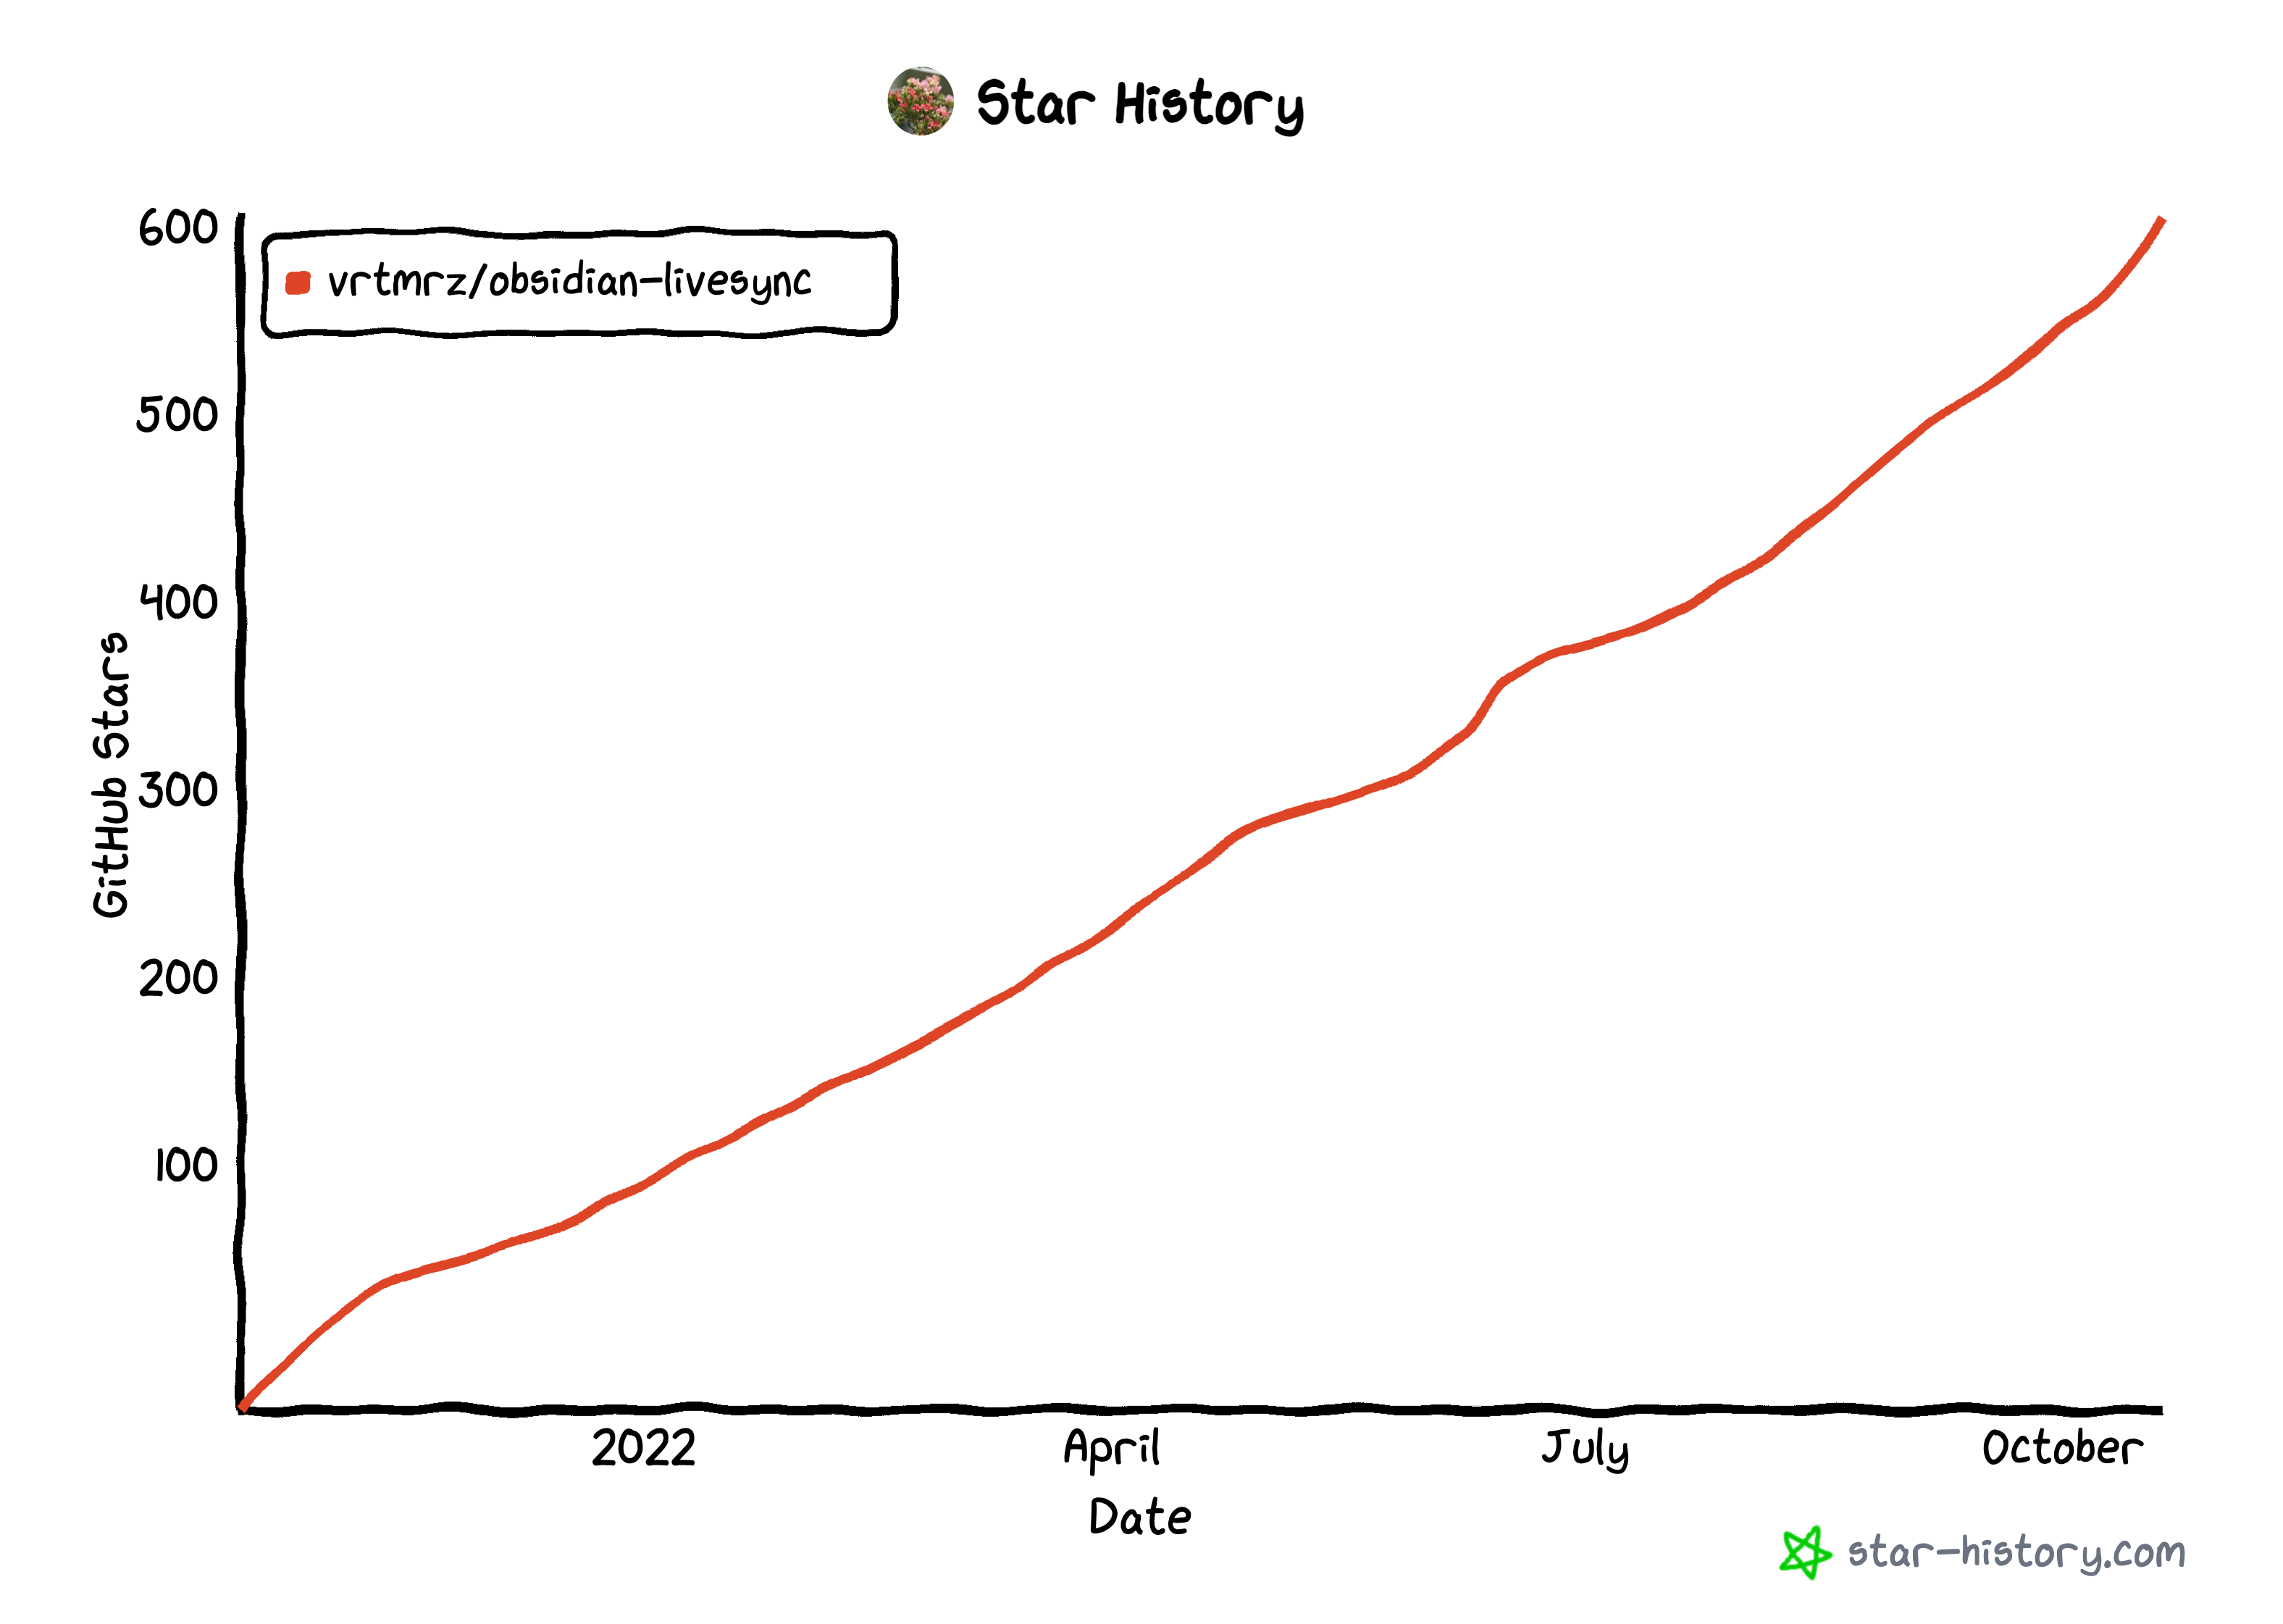 star-history-20221020.png